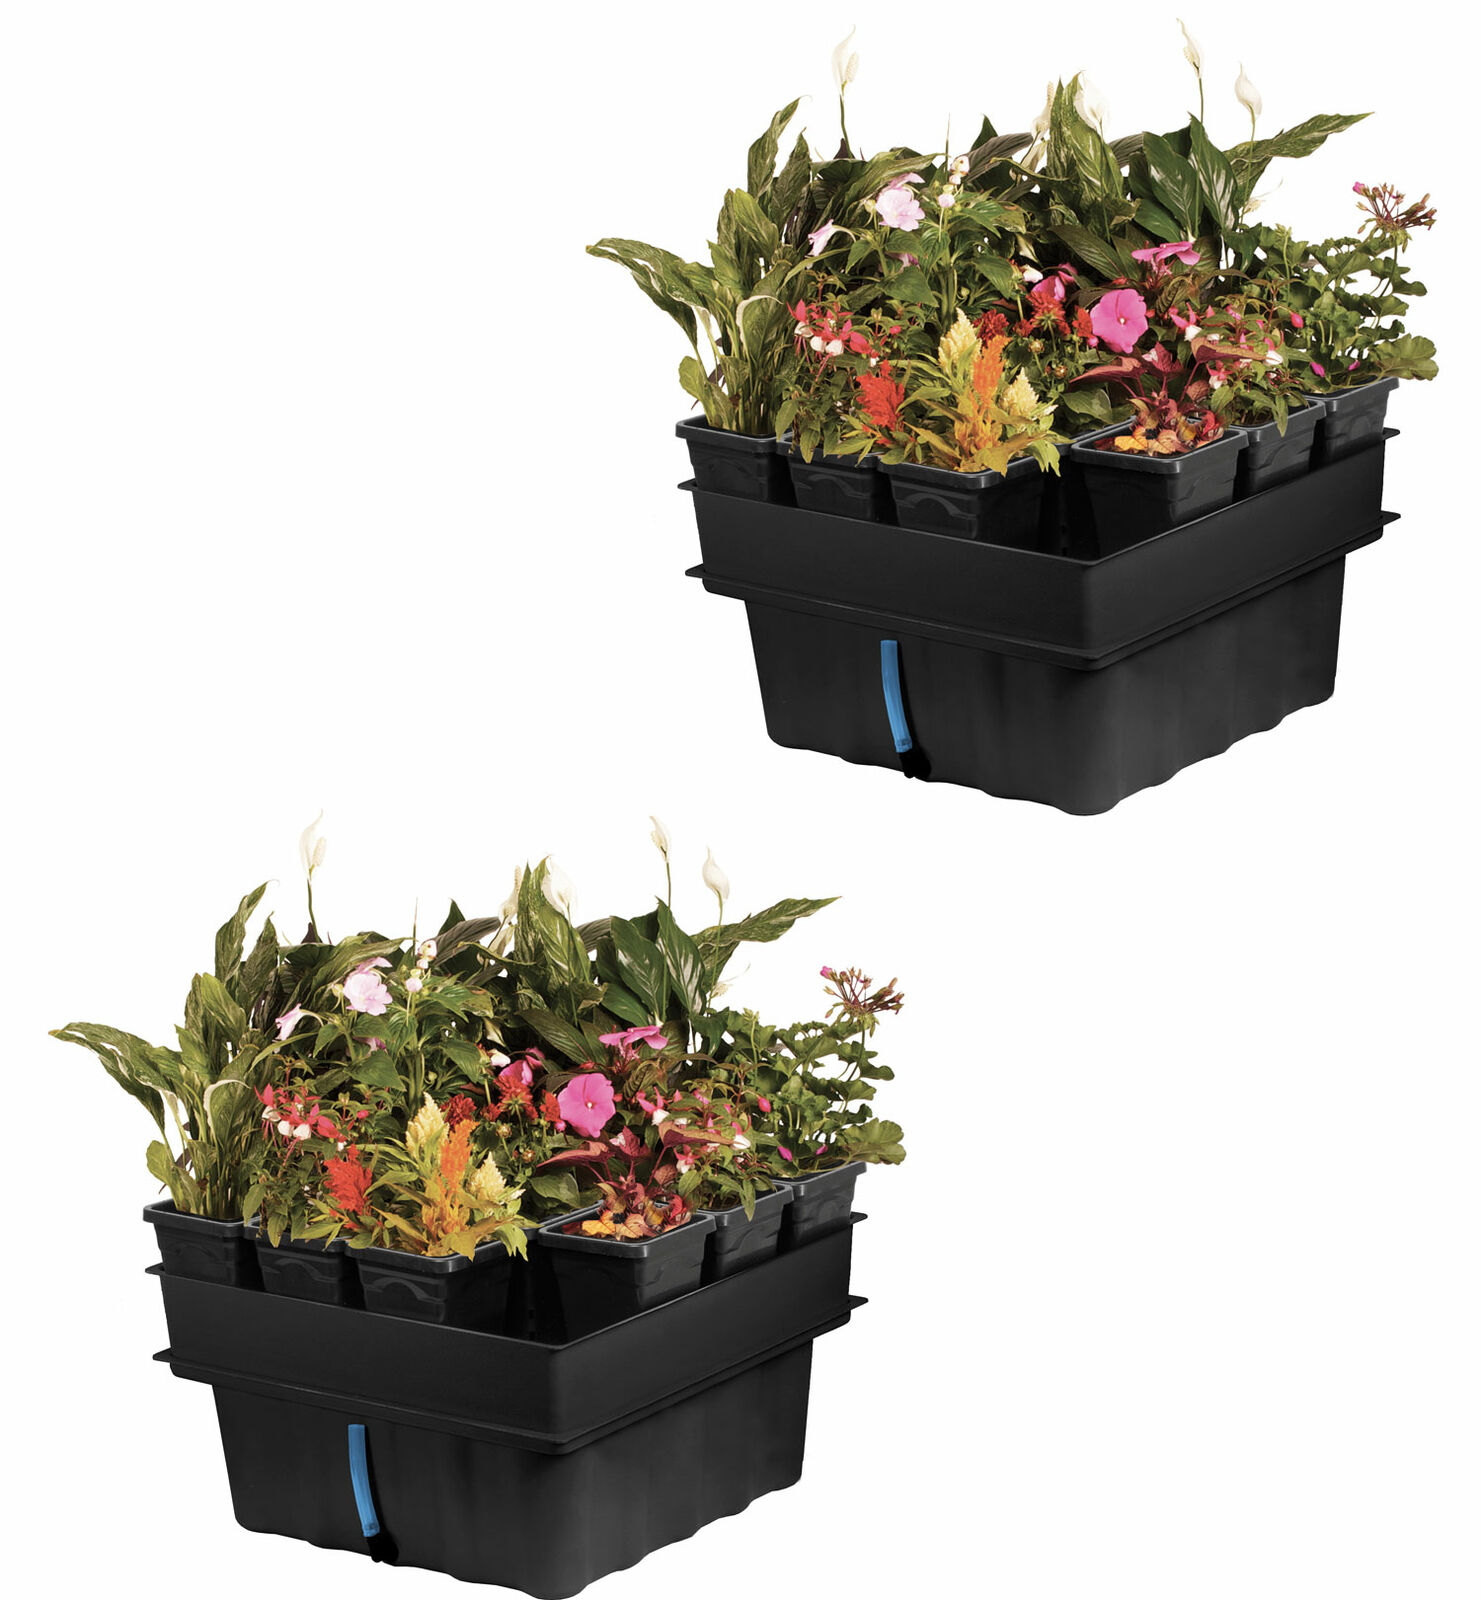 Hydrofarm 22 x 22 Inches Megagarden System with Ebb and Flow System (2 Pack)